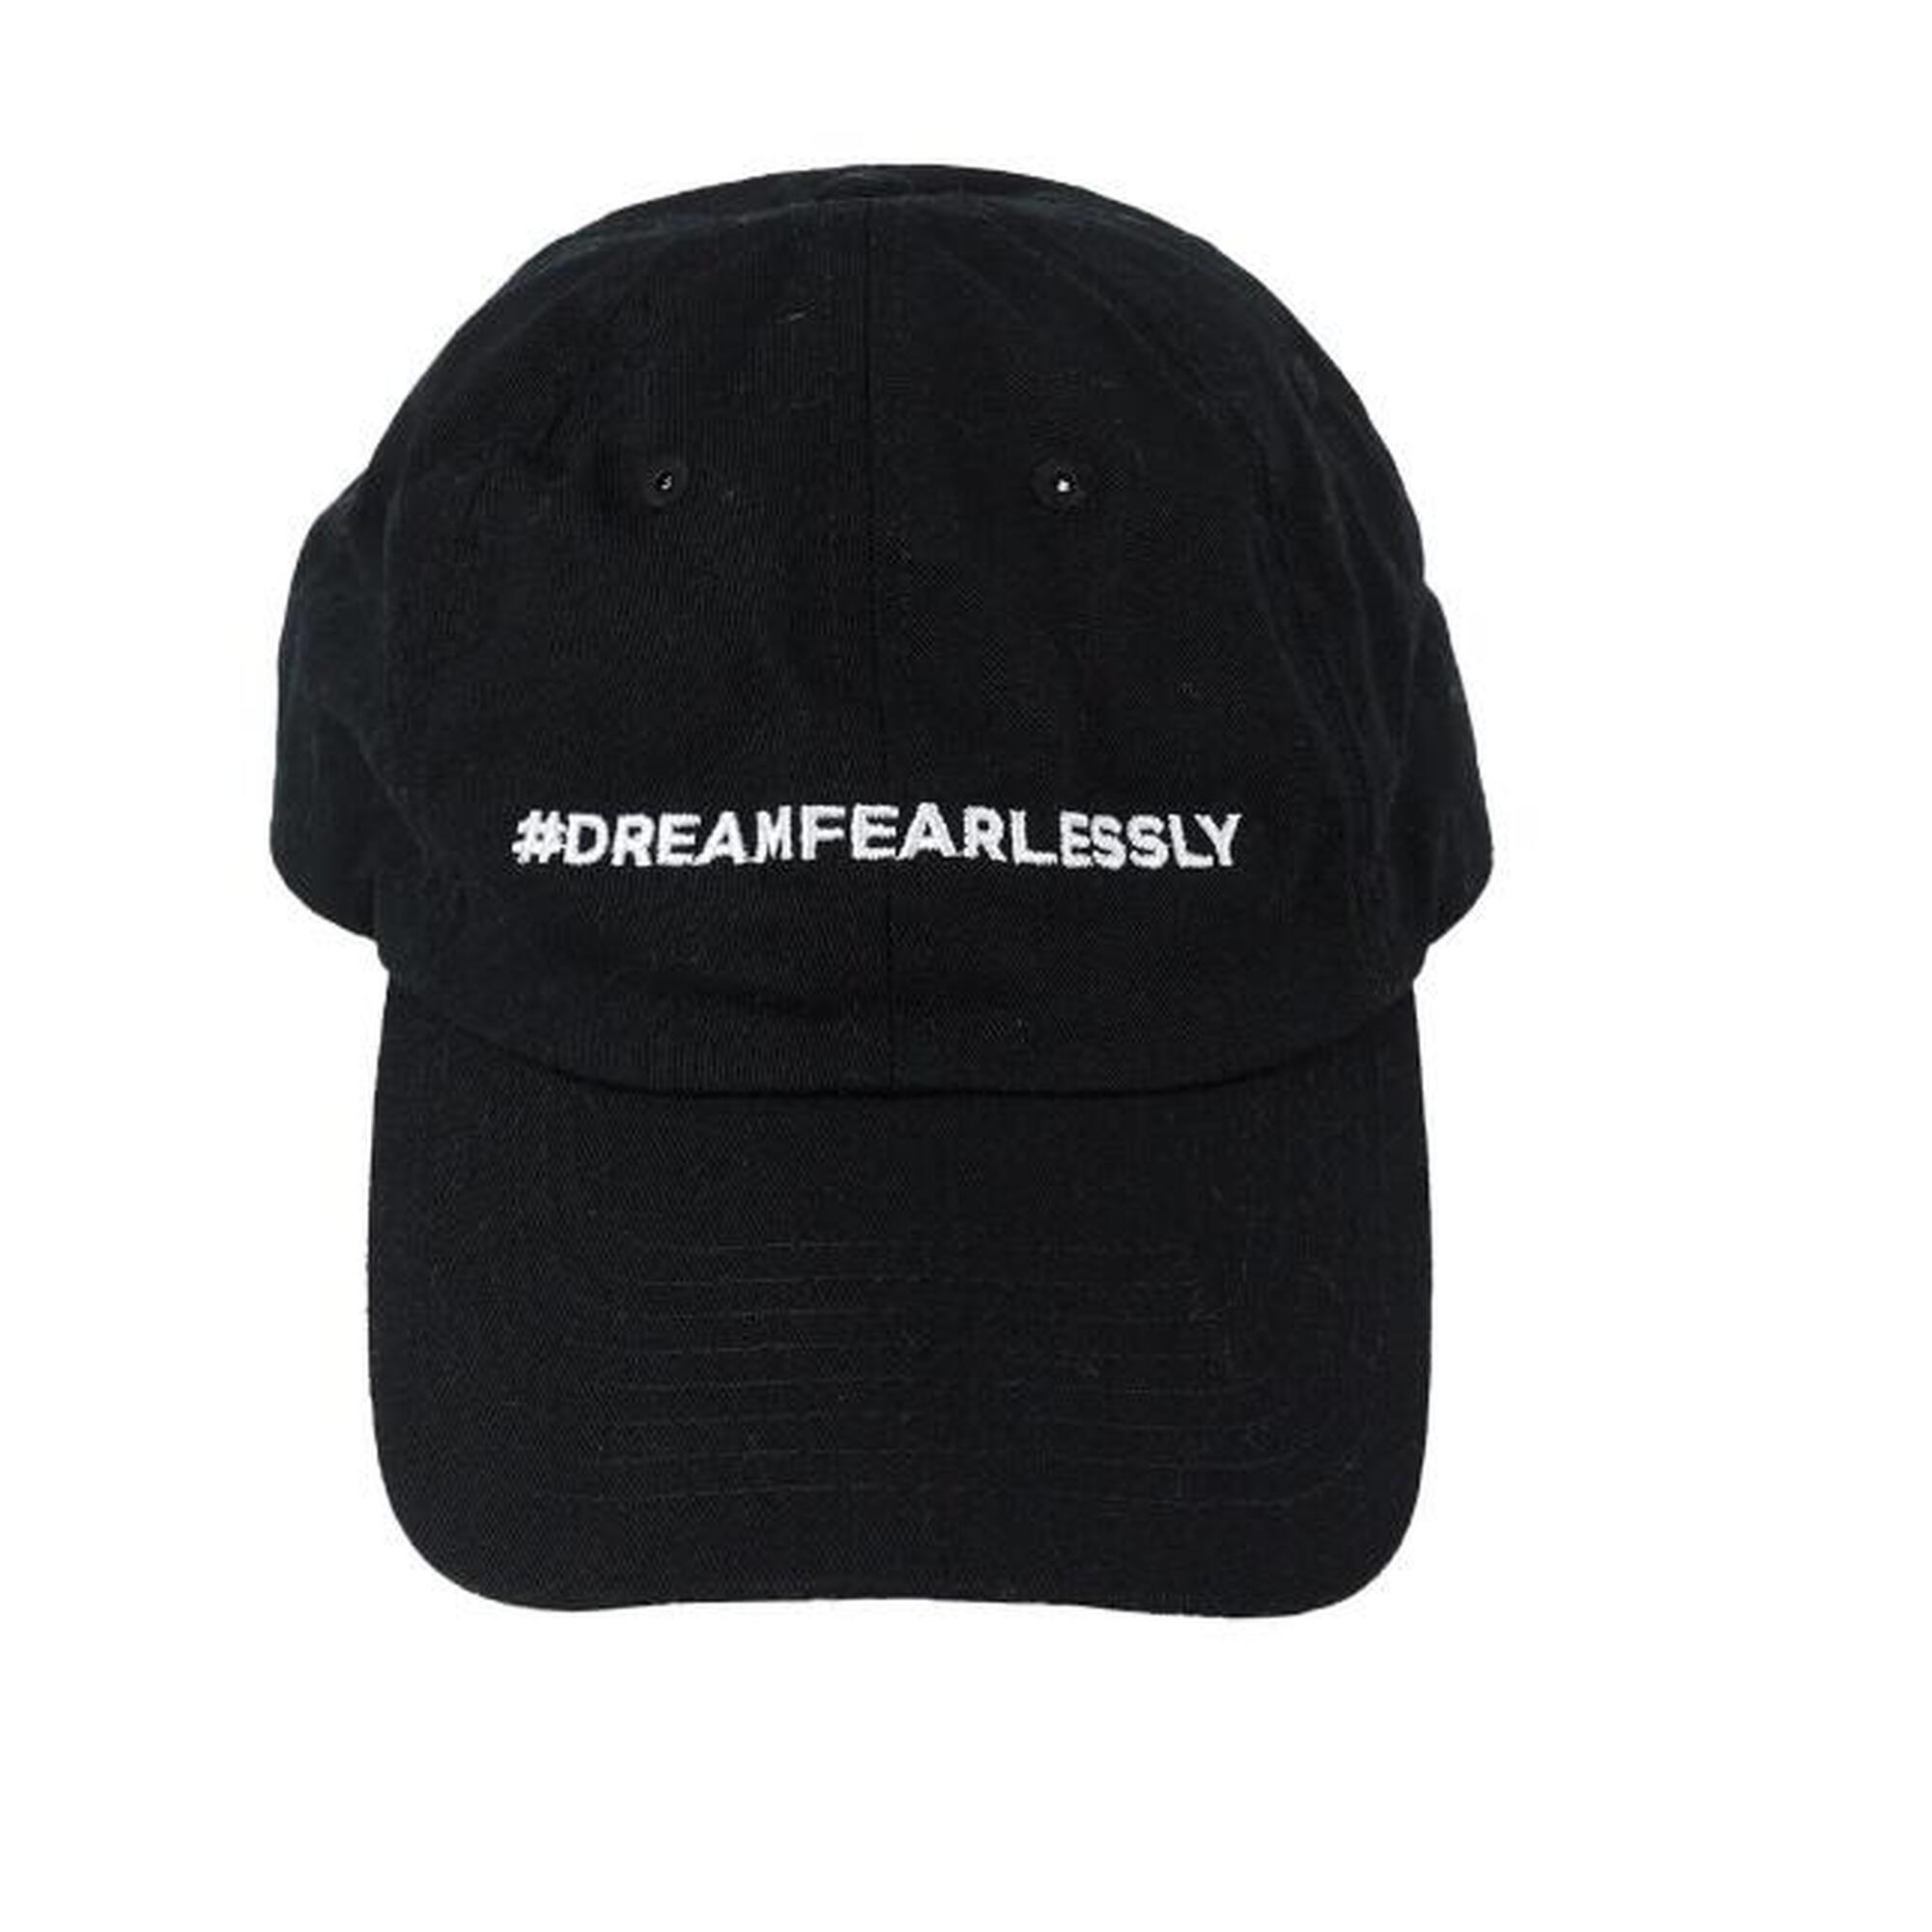 Dreamfearlessly Hiking Cap - Black